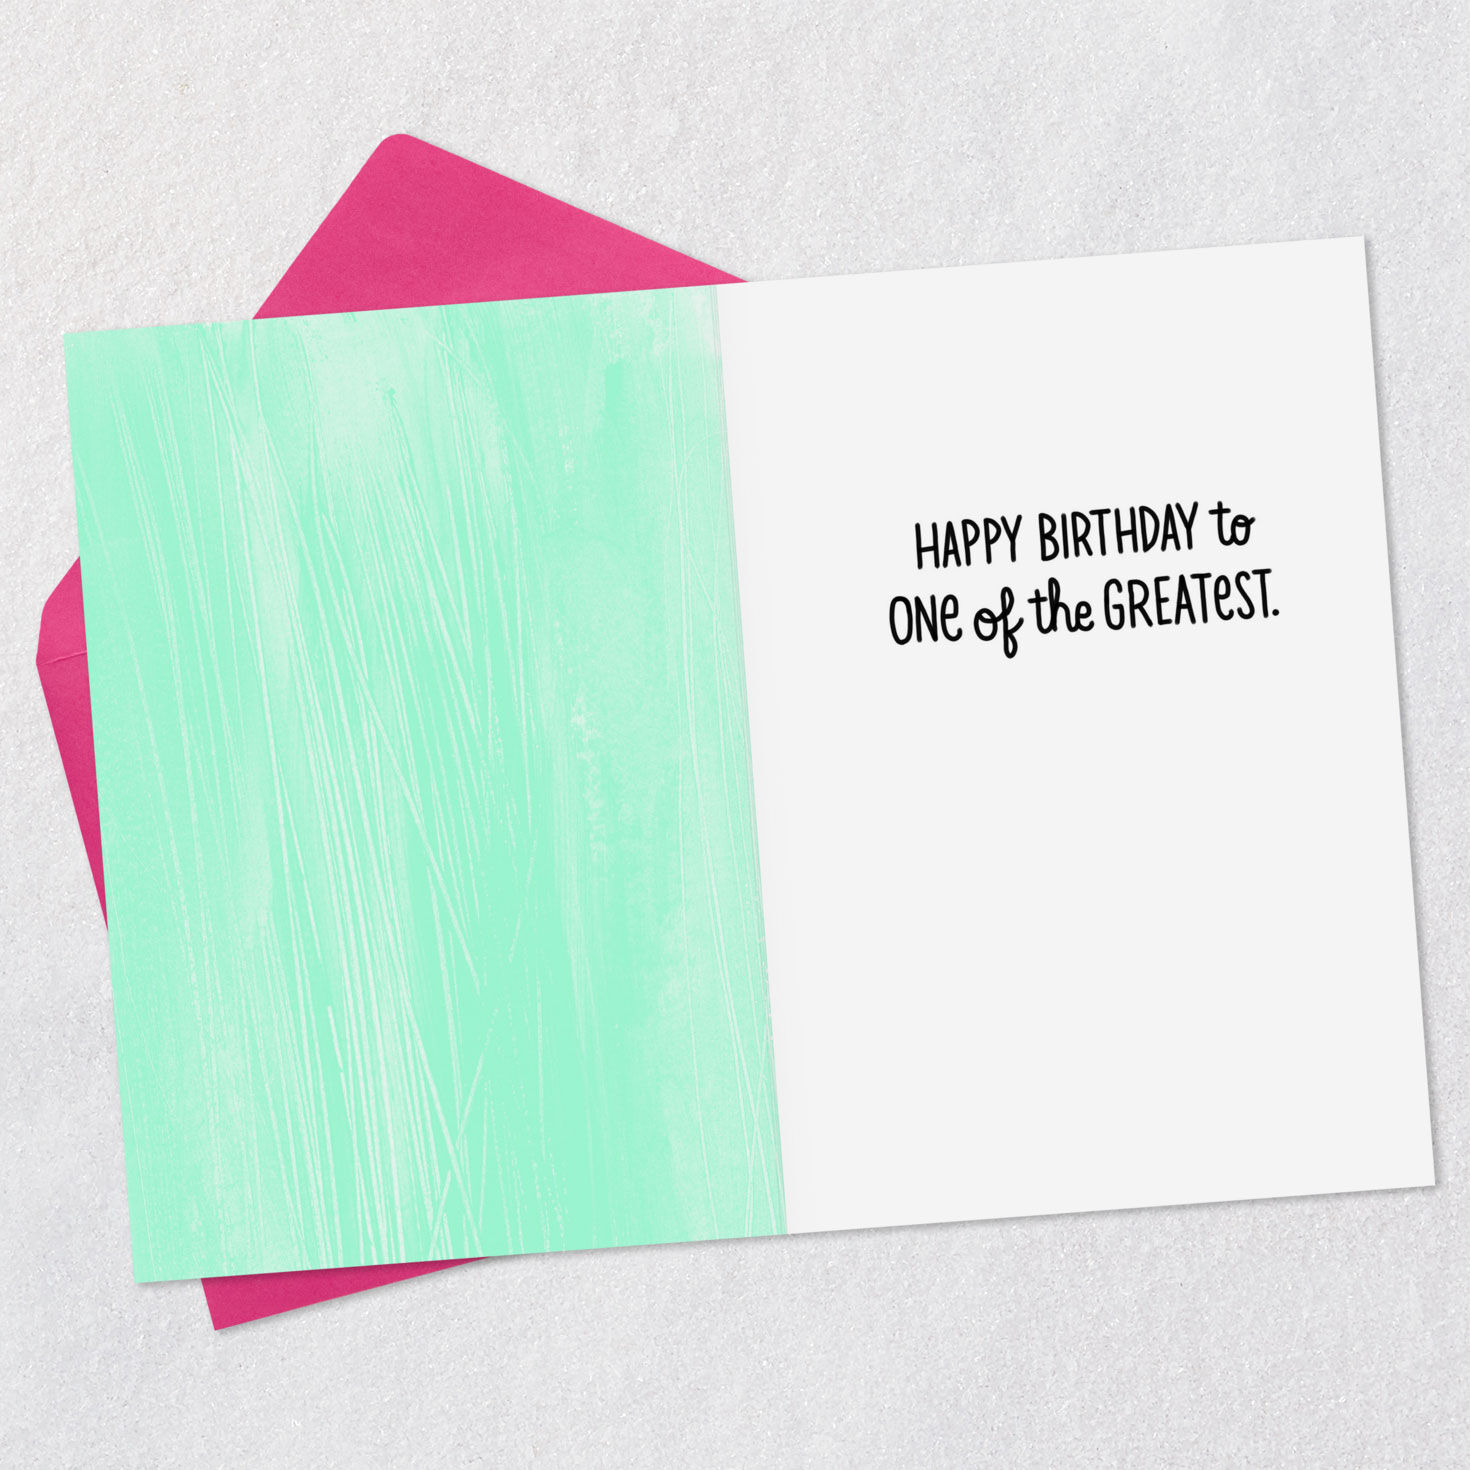 One of the Greatest Funny Birthday Card for Friend for only USD 3.69 | Hallmark